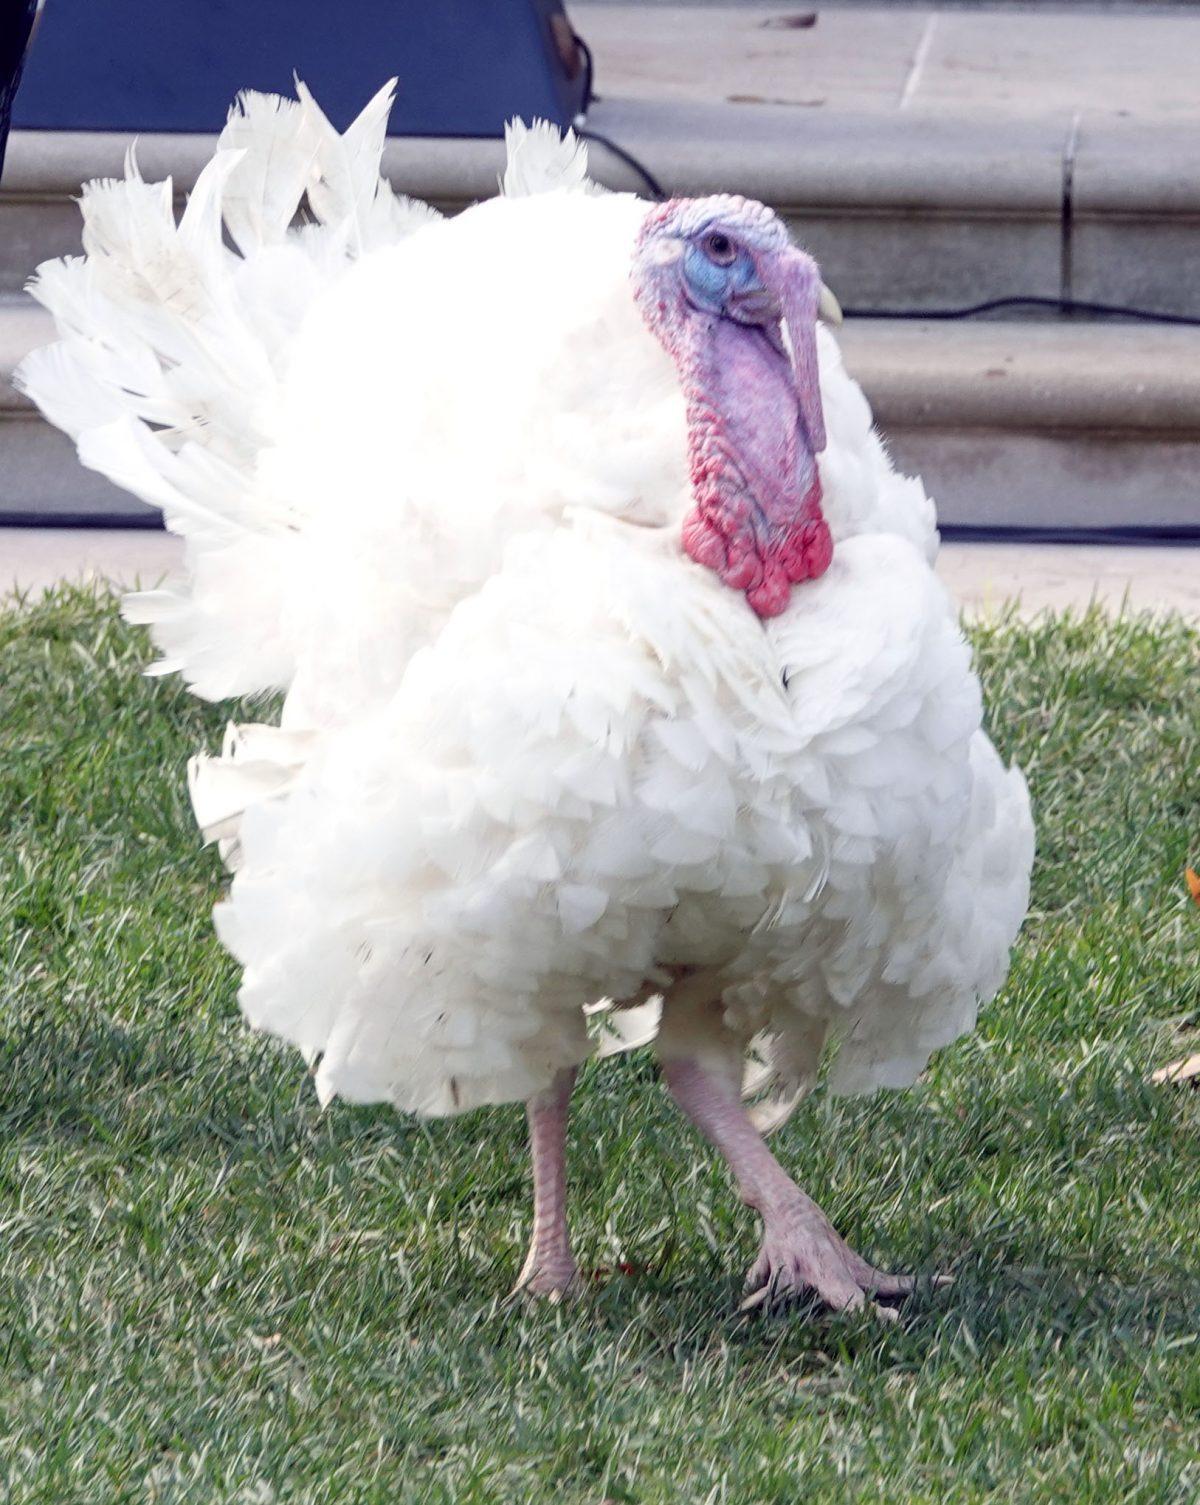 The turkey Peas, who was pardoned by President Donald Trump, at the White House in Washington on Nov. 20, 2018. (Jenny Jing/The Epoch Times)